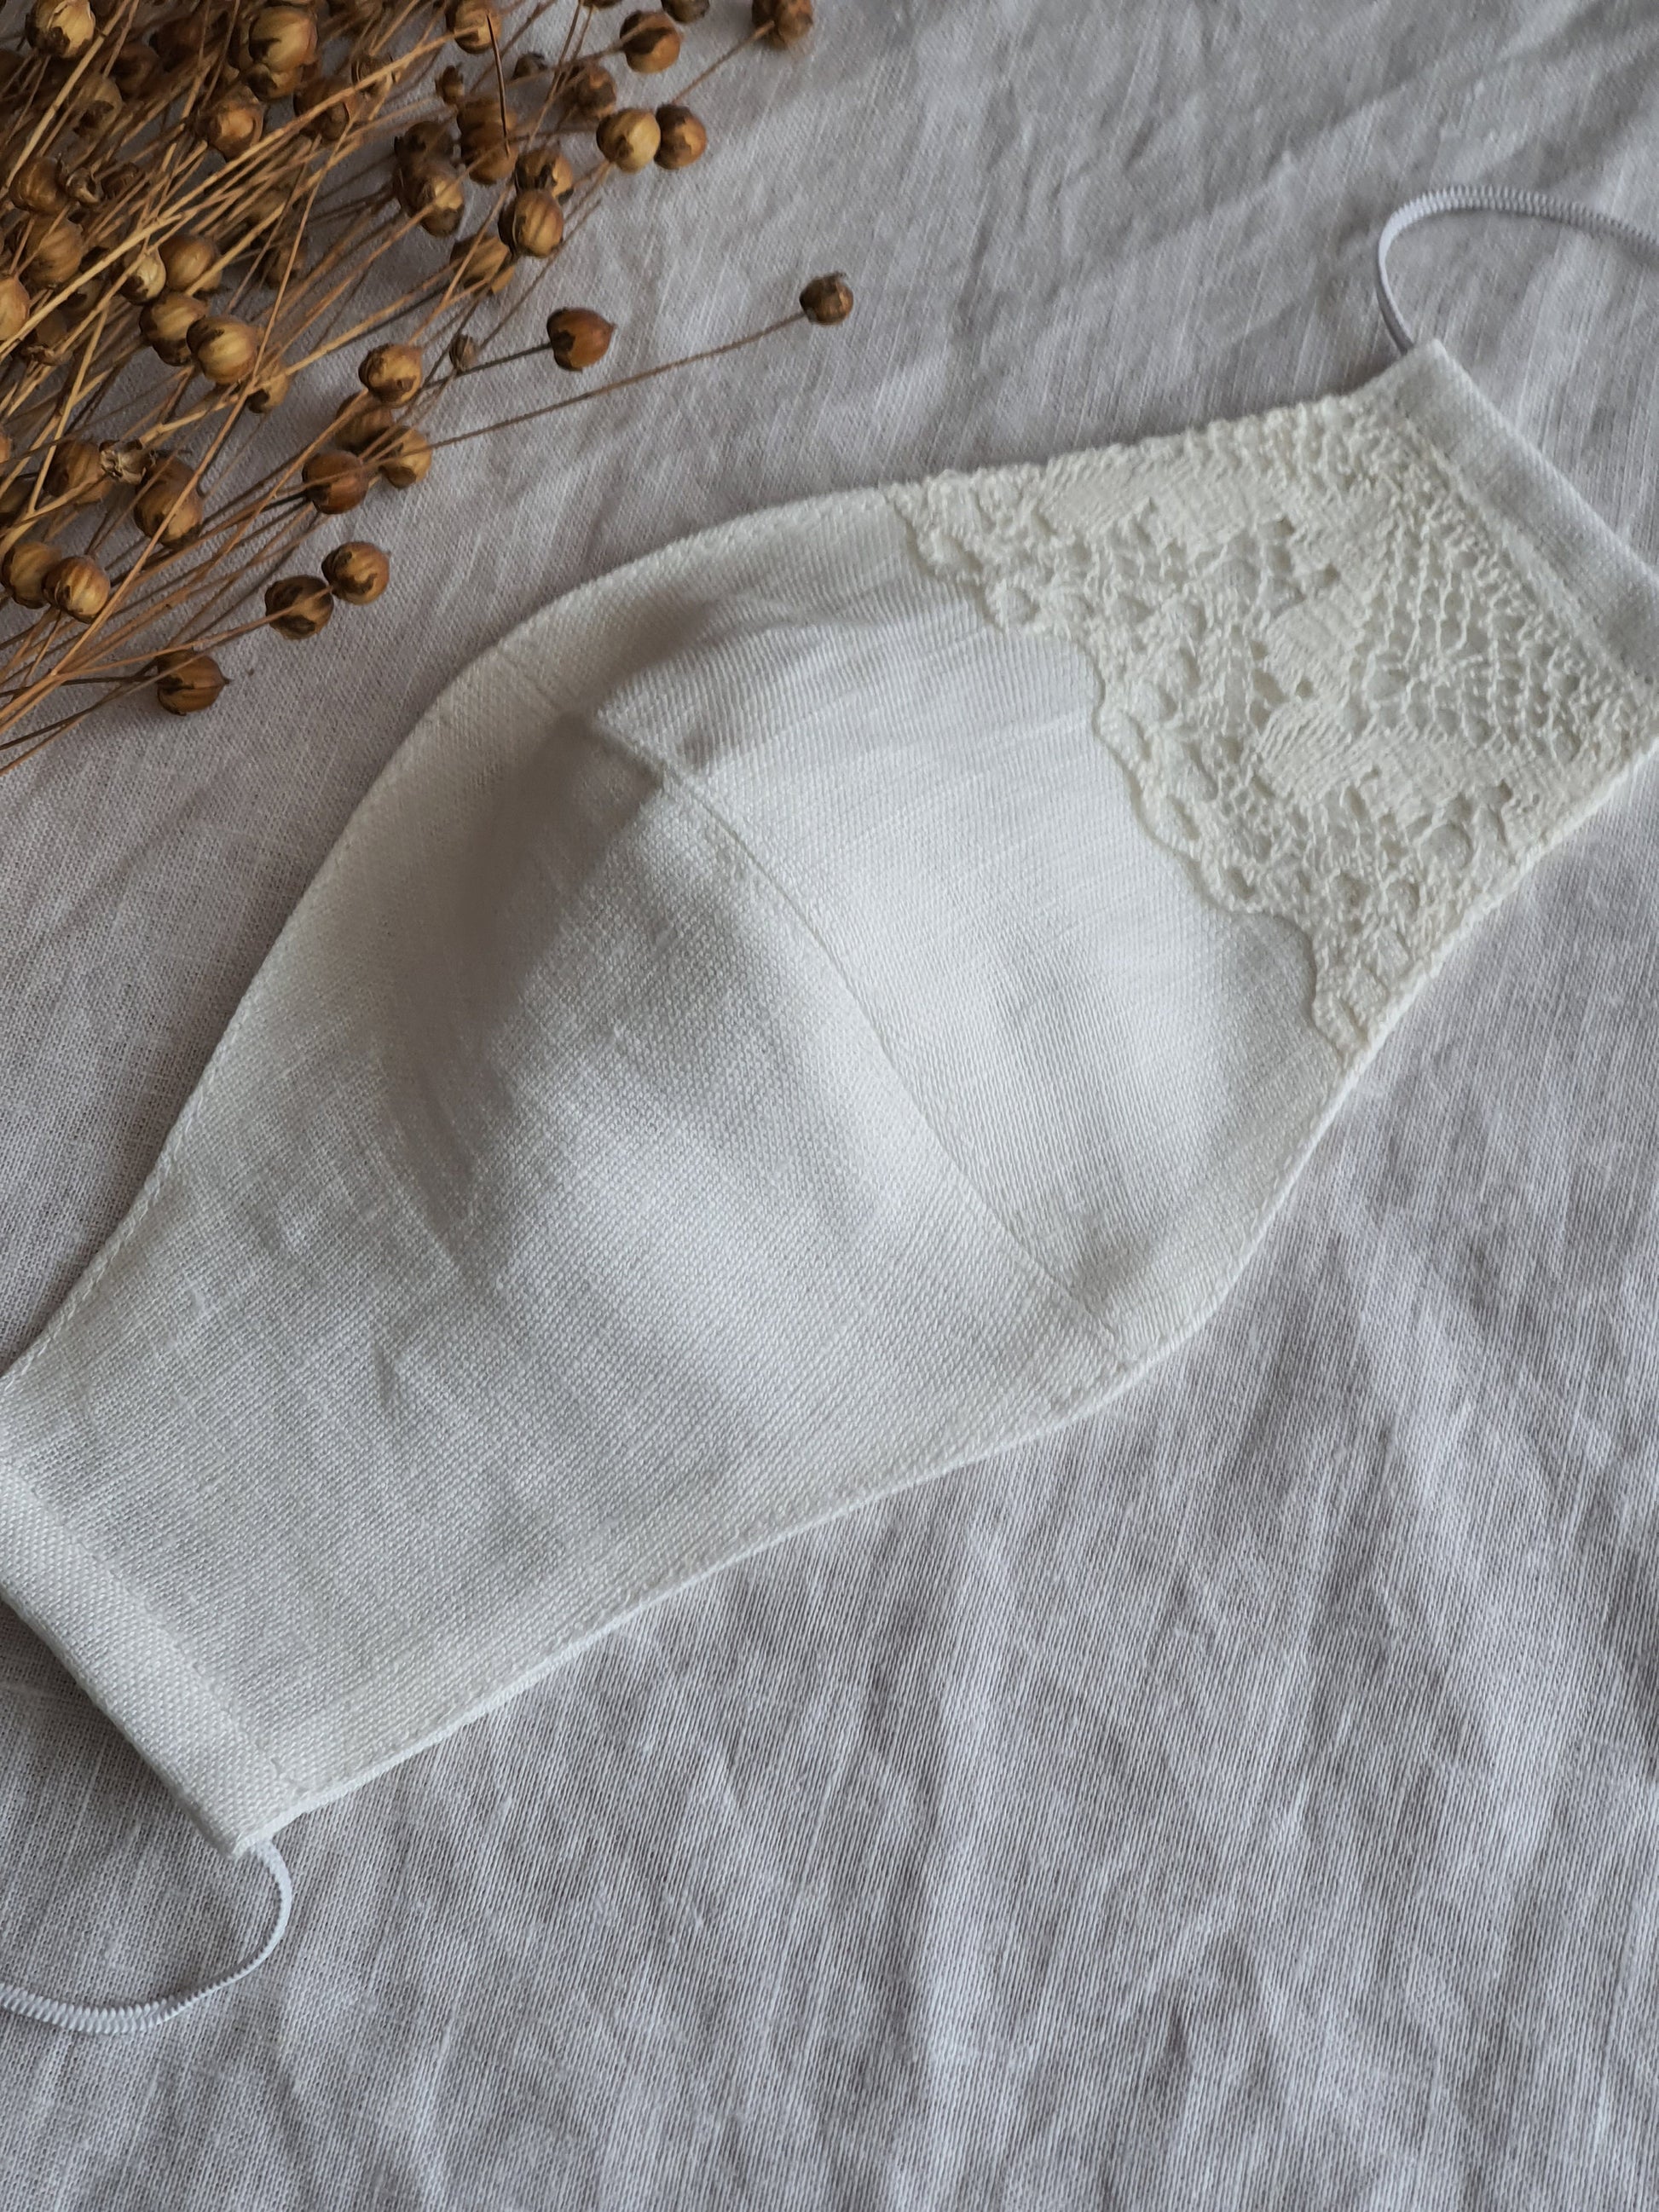 Occasional Linen Face Mask Laced/ Reusable Organic Mask With filter pocket